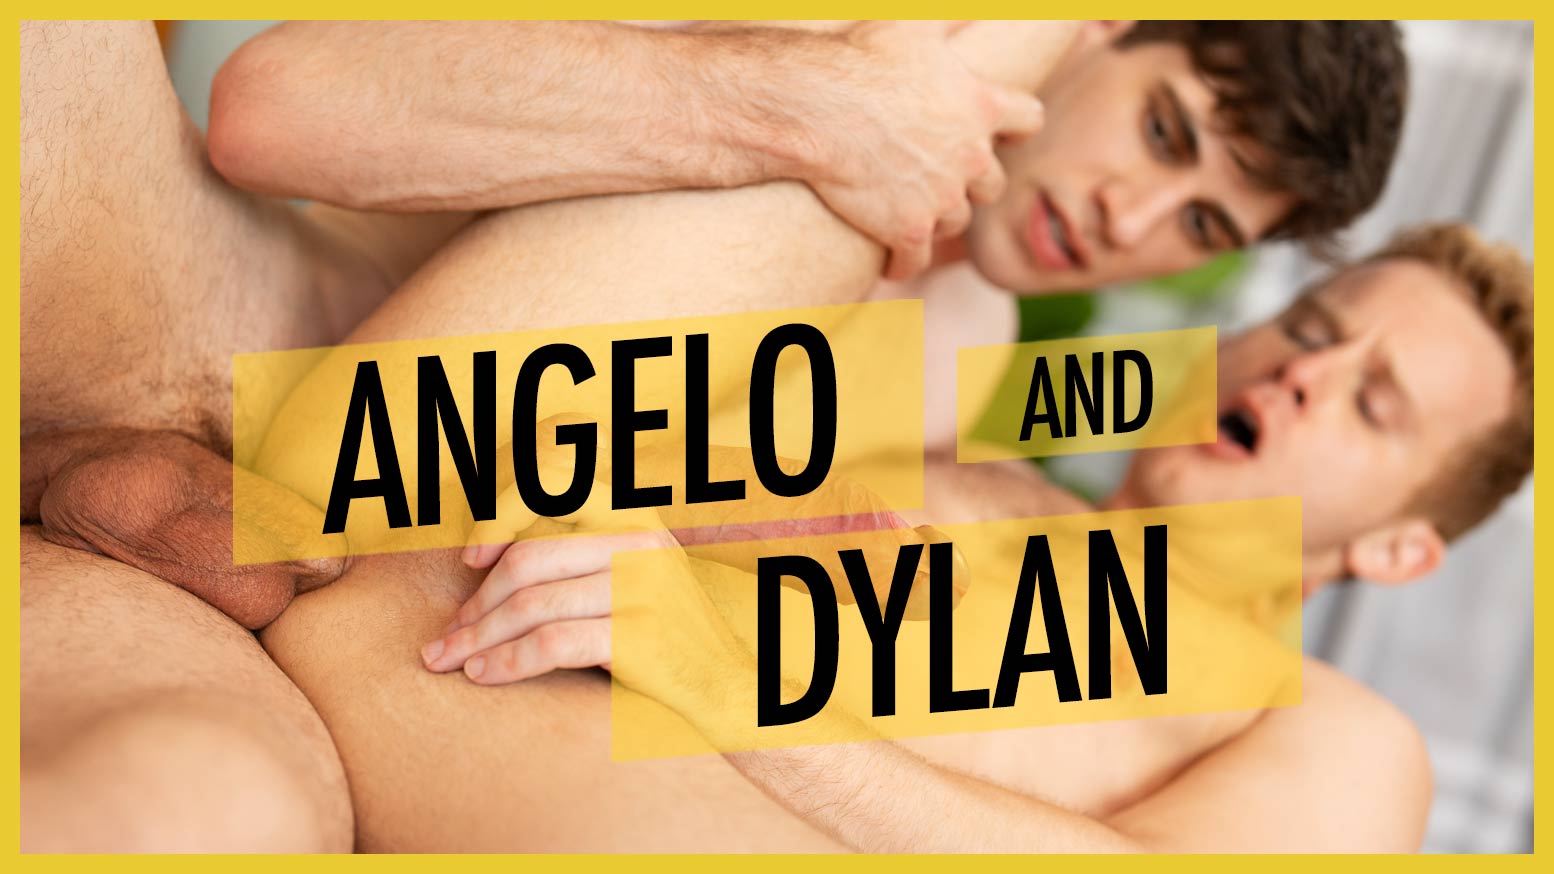 Angelo & Dylan